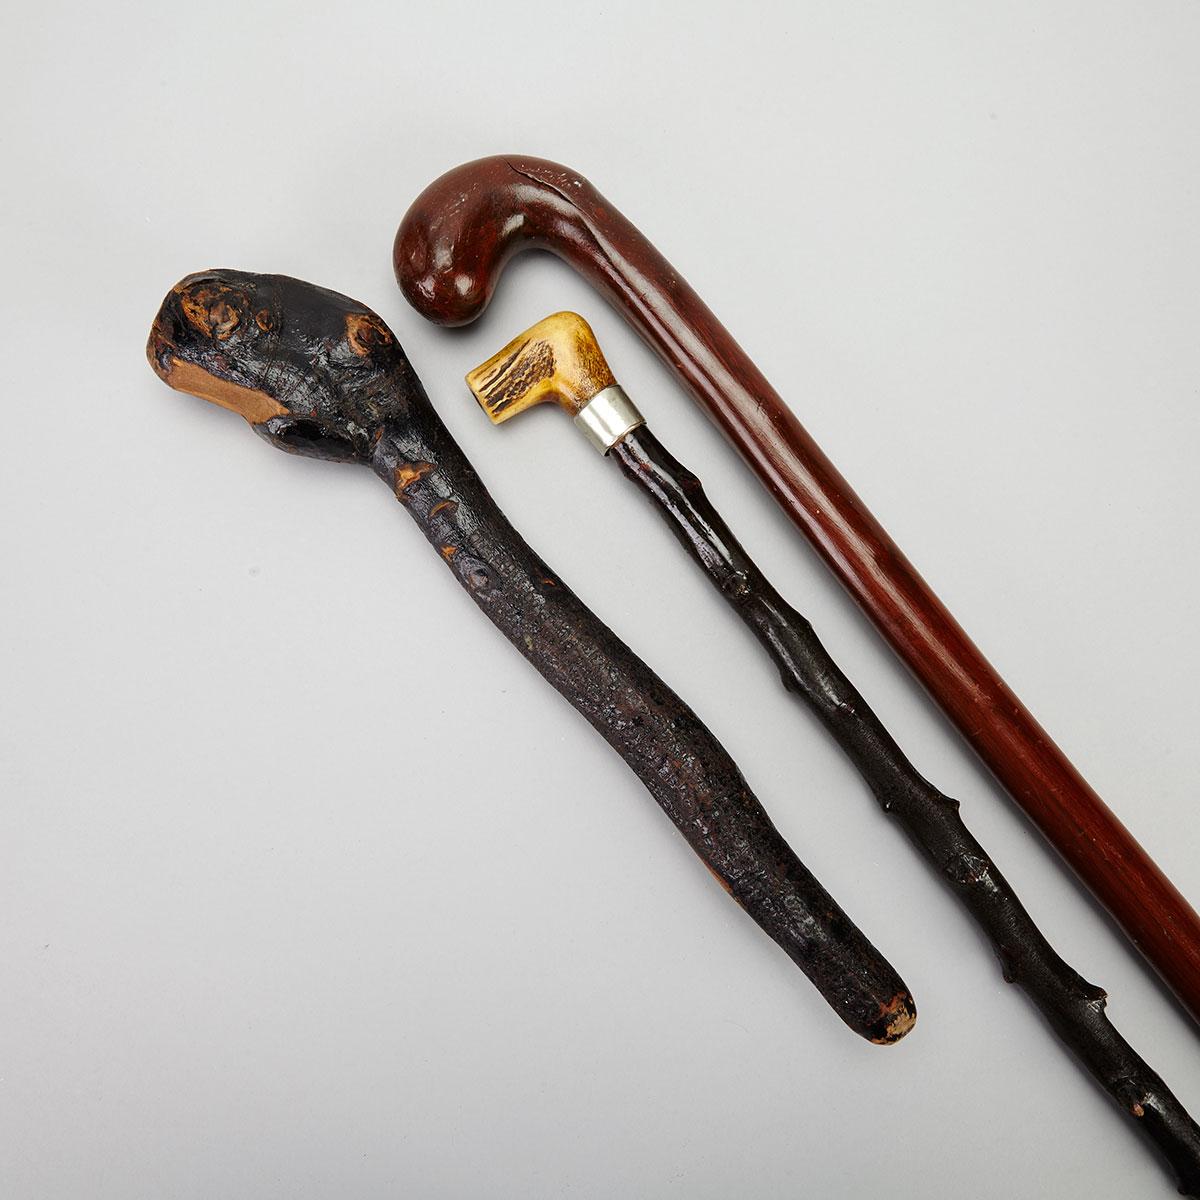 Black Thorn Walking Stick, a  Shillelagh and a Carved Hardwood Walking Stick, 19th century